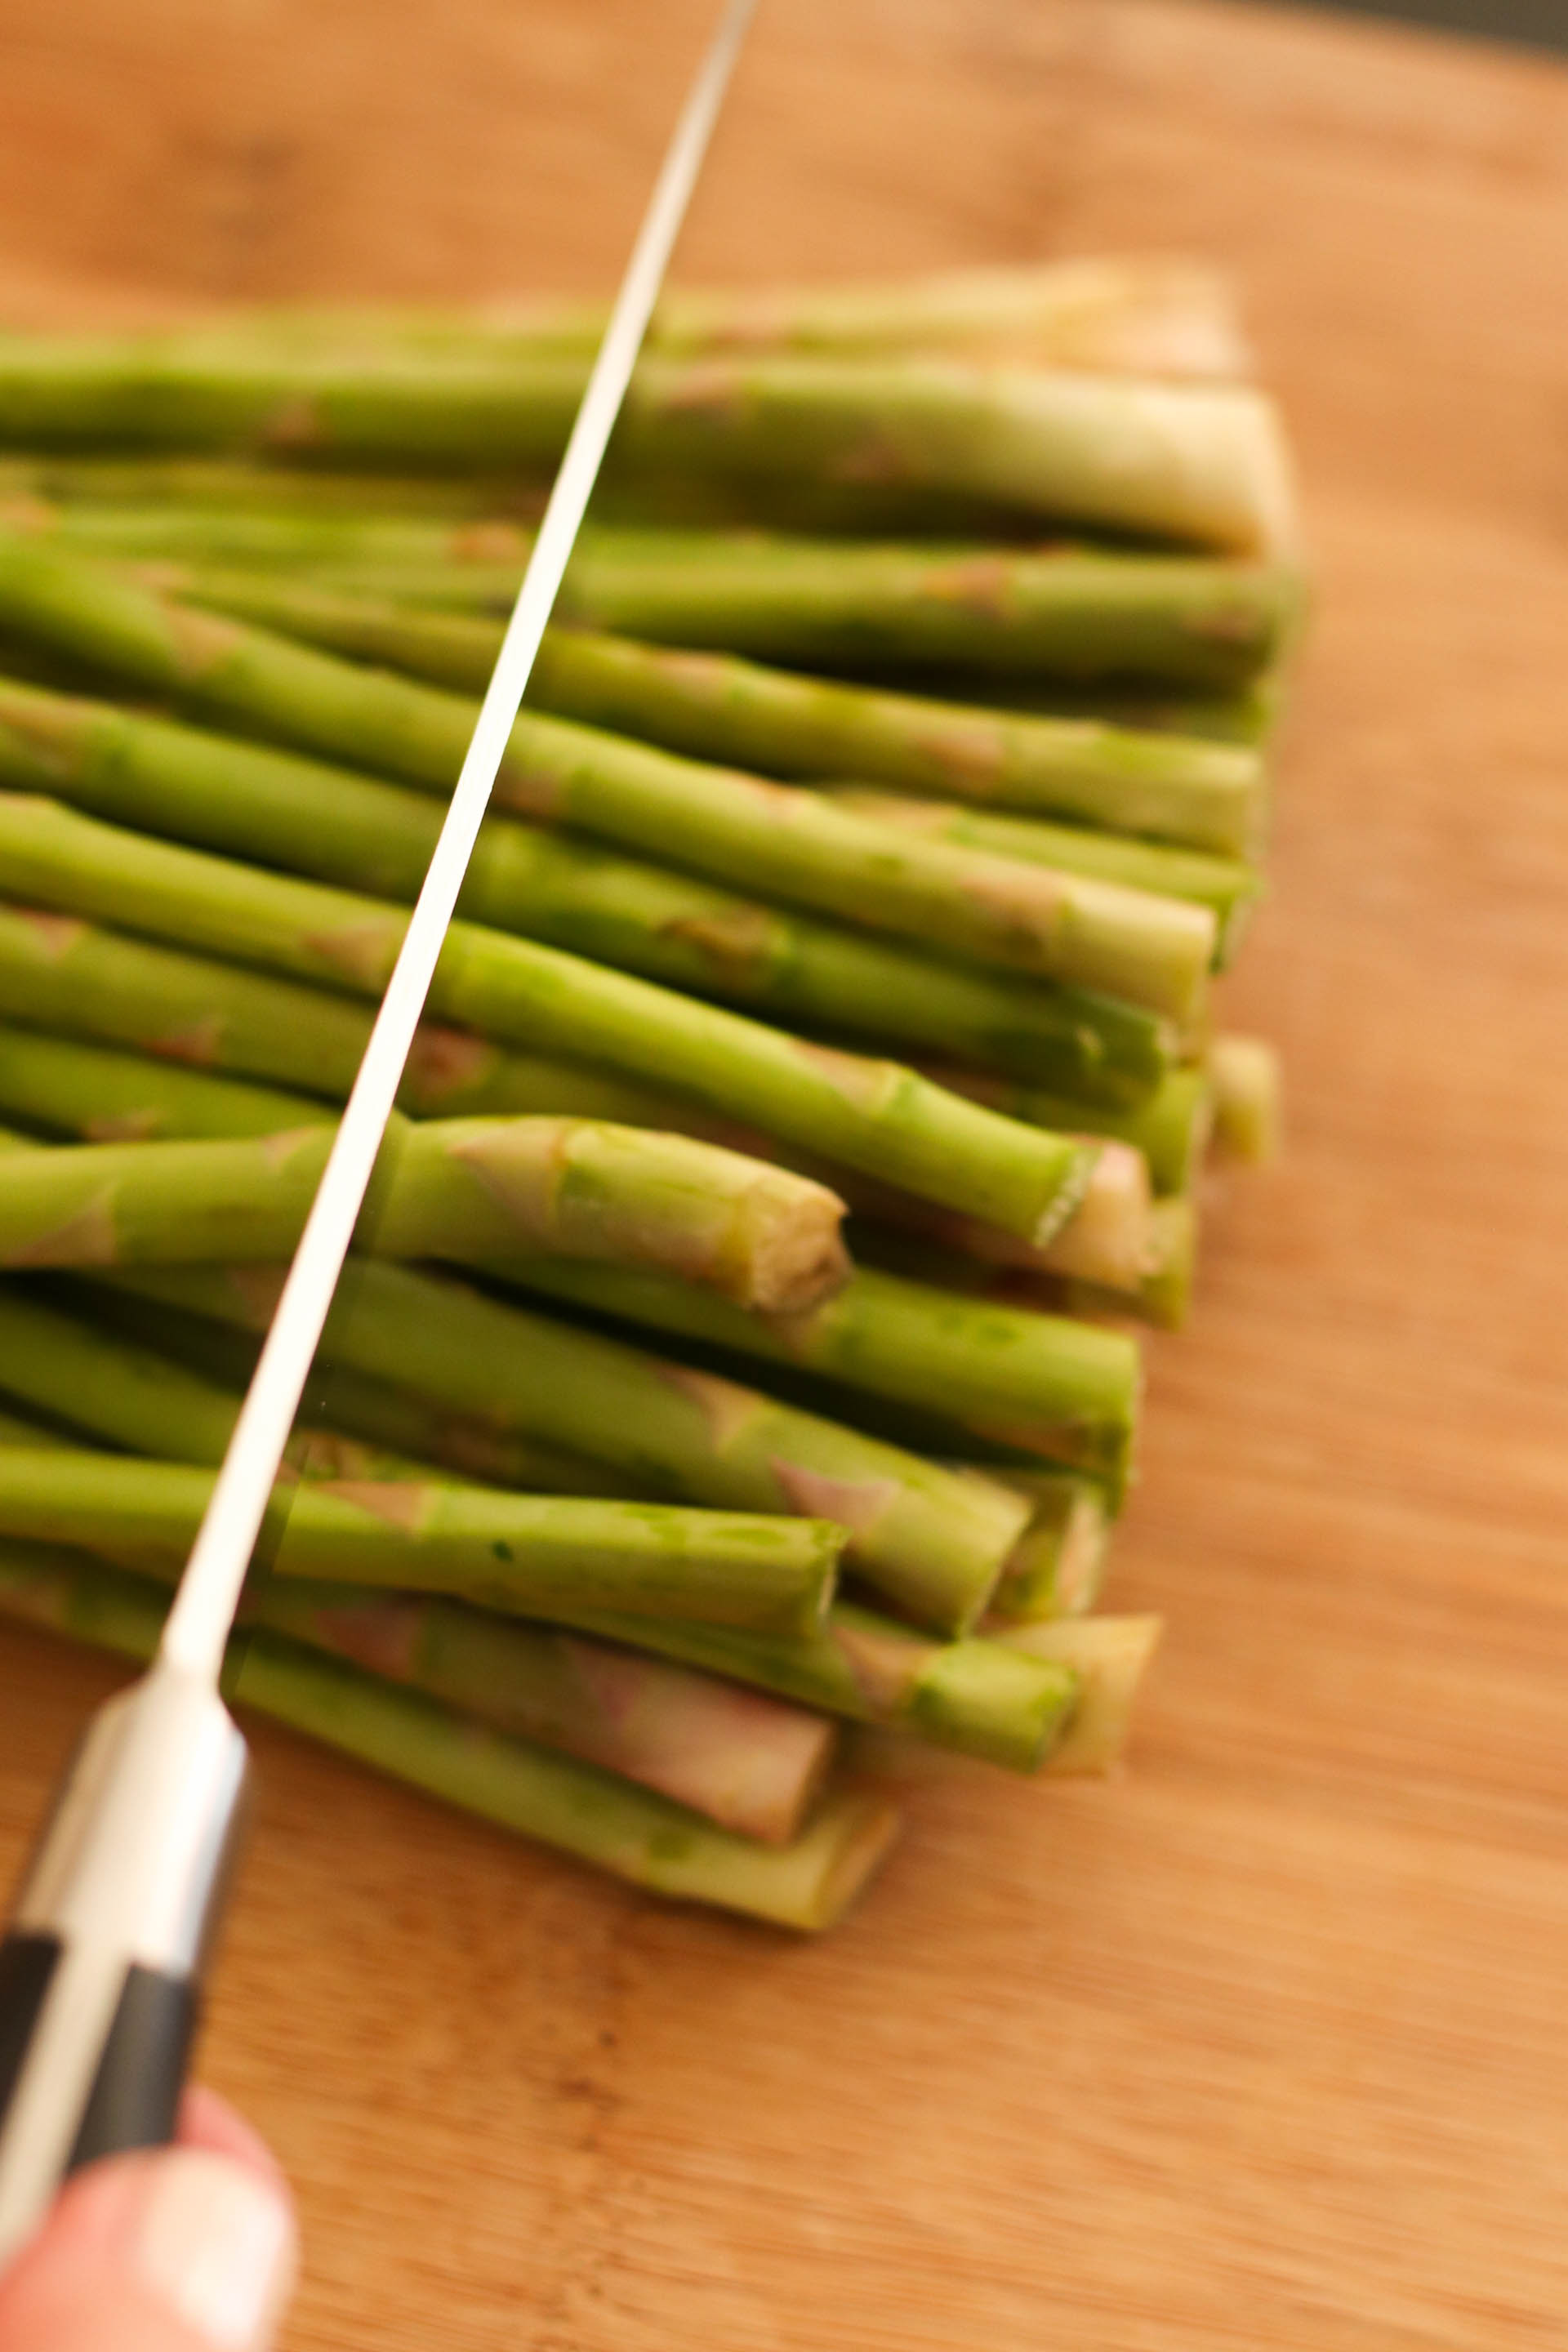 Cutting off the ends of the asparagus spears